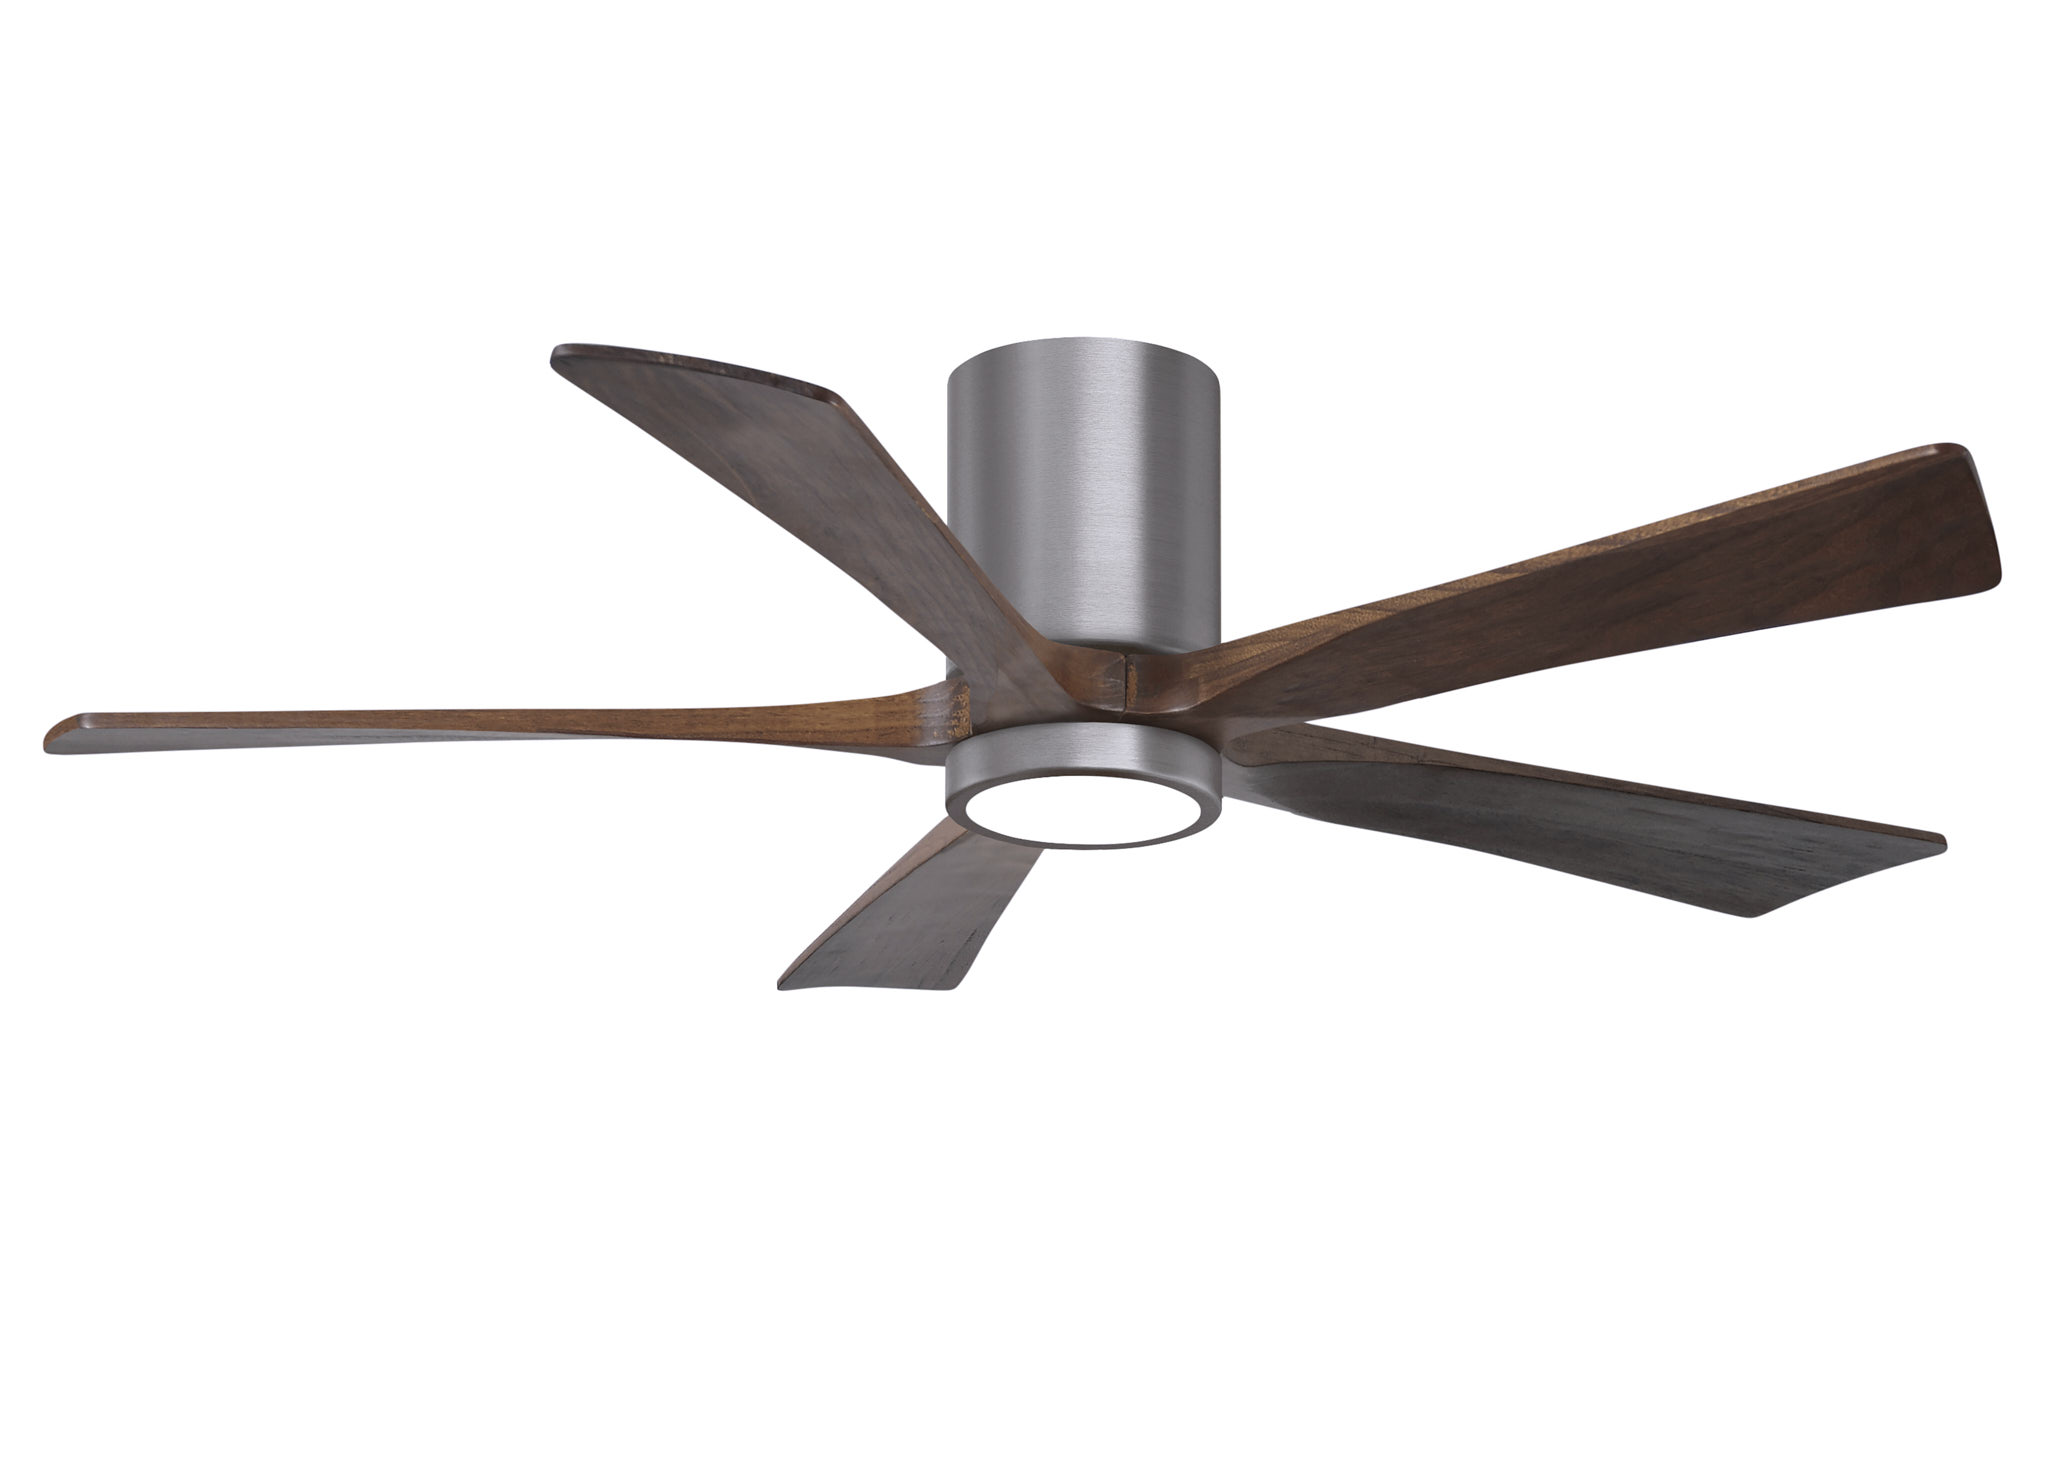 Irene-5HLK 6-speed ceiling fan in brushed pewter finish with 52